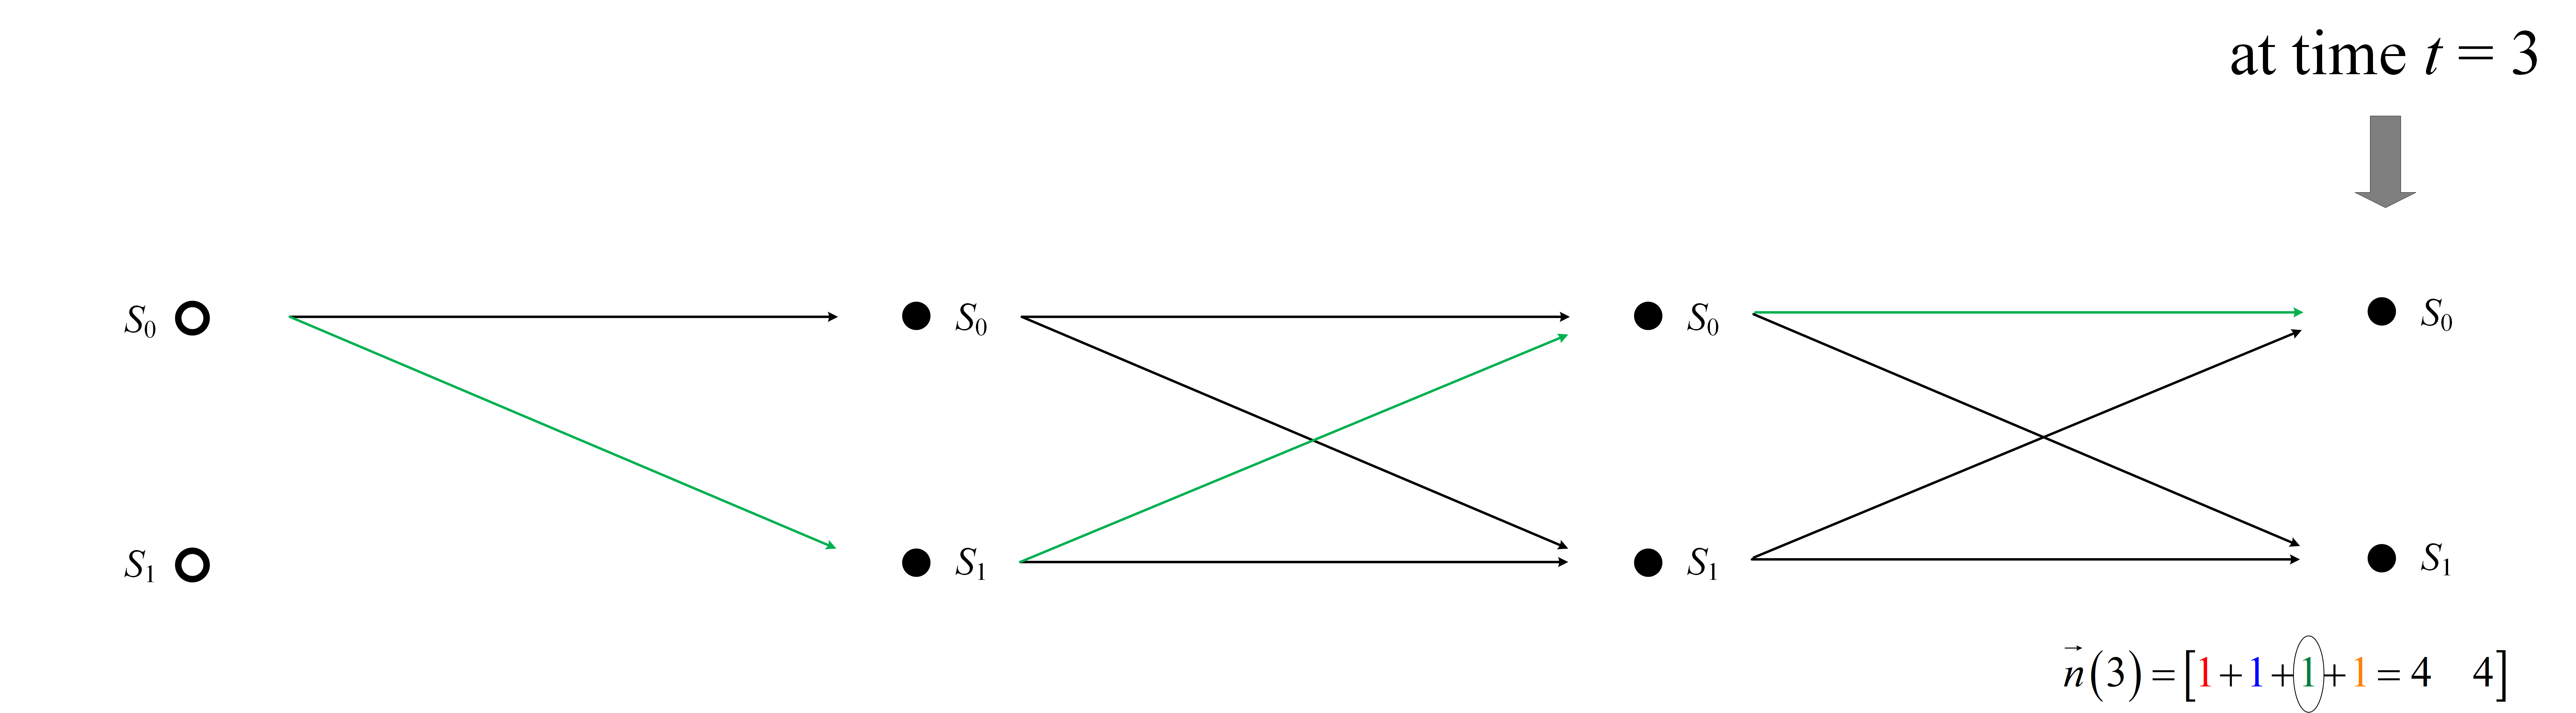 Figure 6 Step-4 construction of Trellis diagram at time t = 3 higlighting (green) only one Trellis path